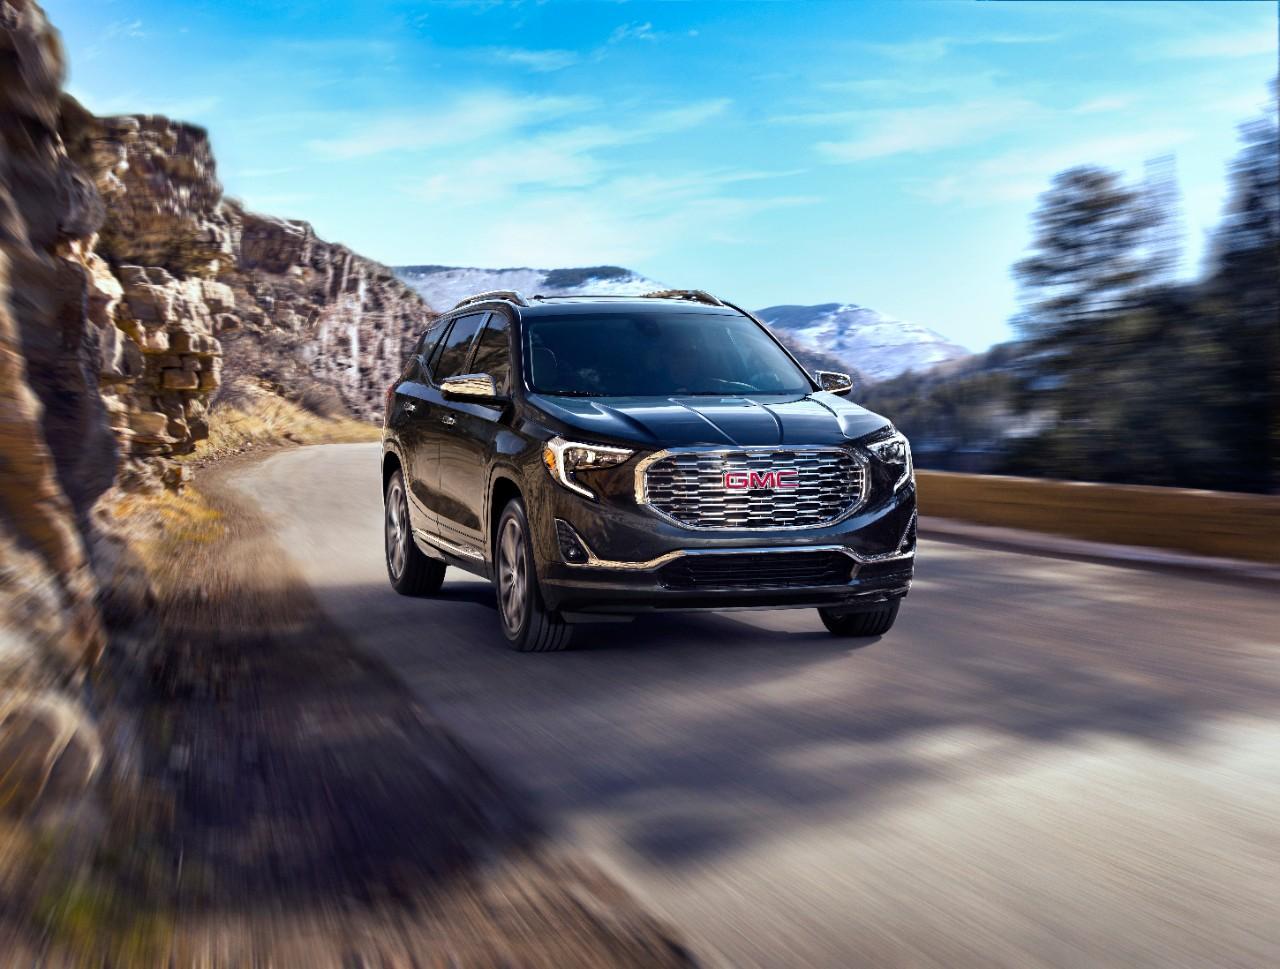 The GMC Terrain has better fuel efficiency but less space than the Acadia.